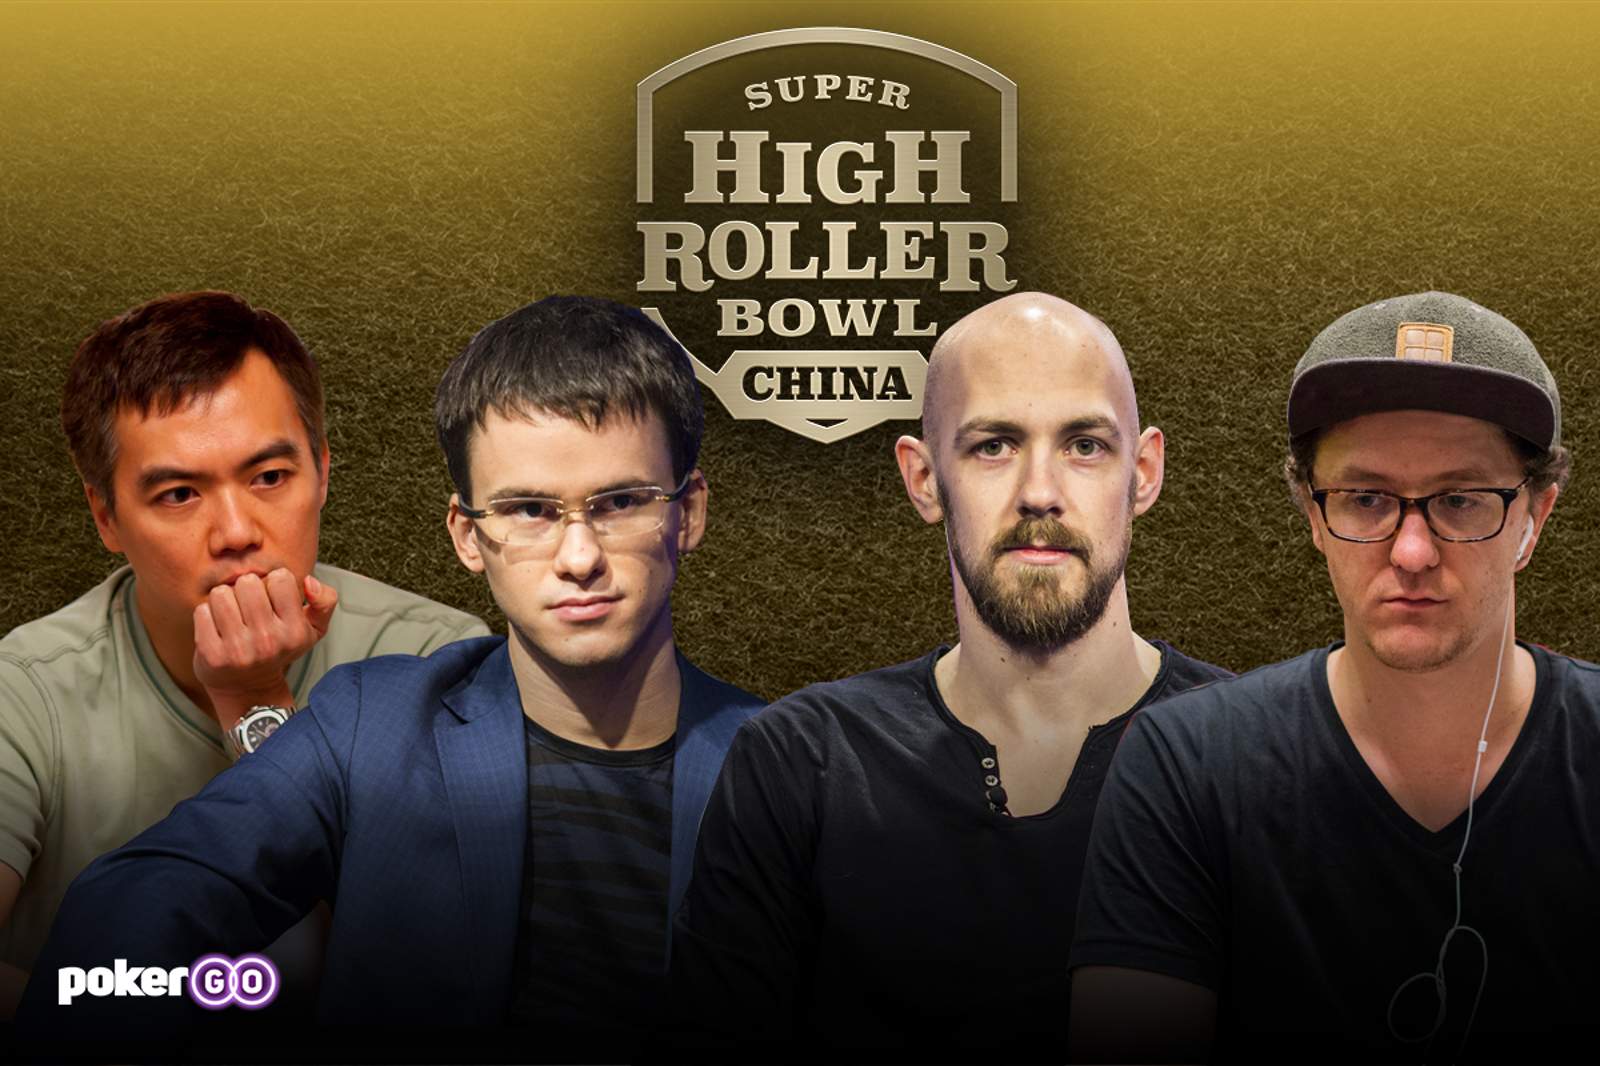 Super High Roller Bowl China Day 1 Comes to PokerGO